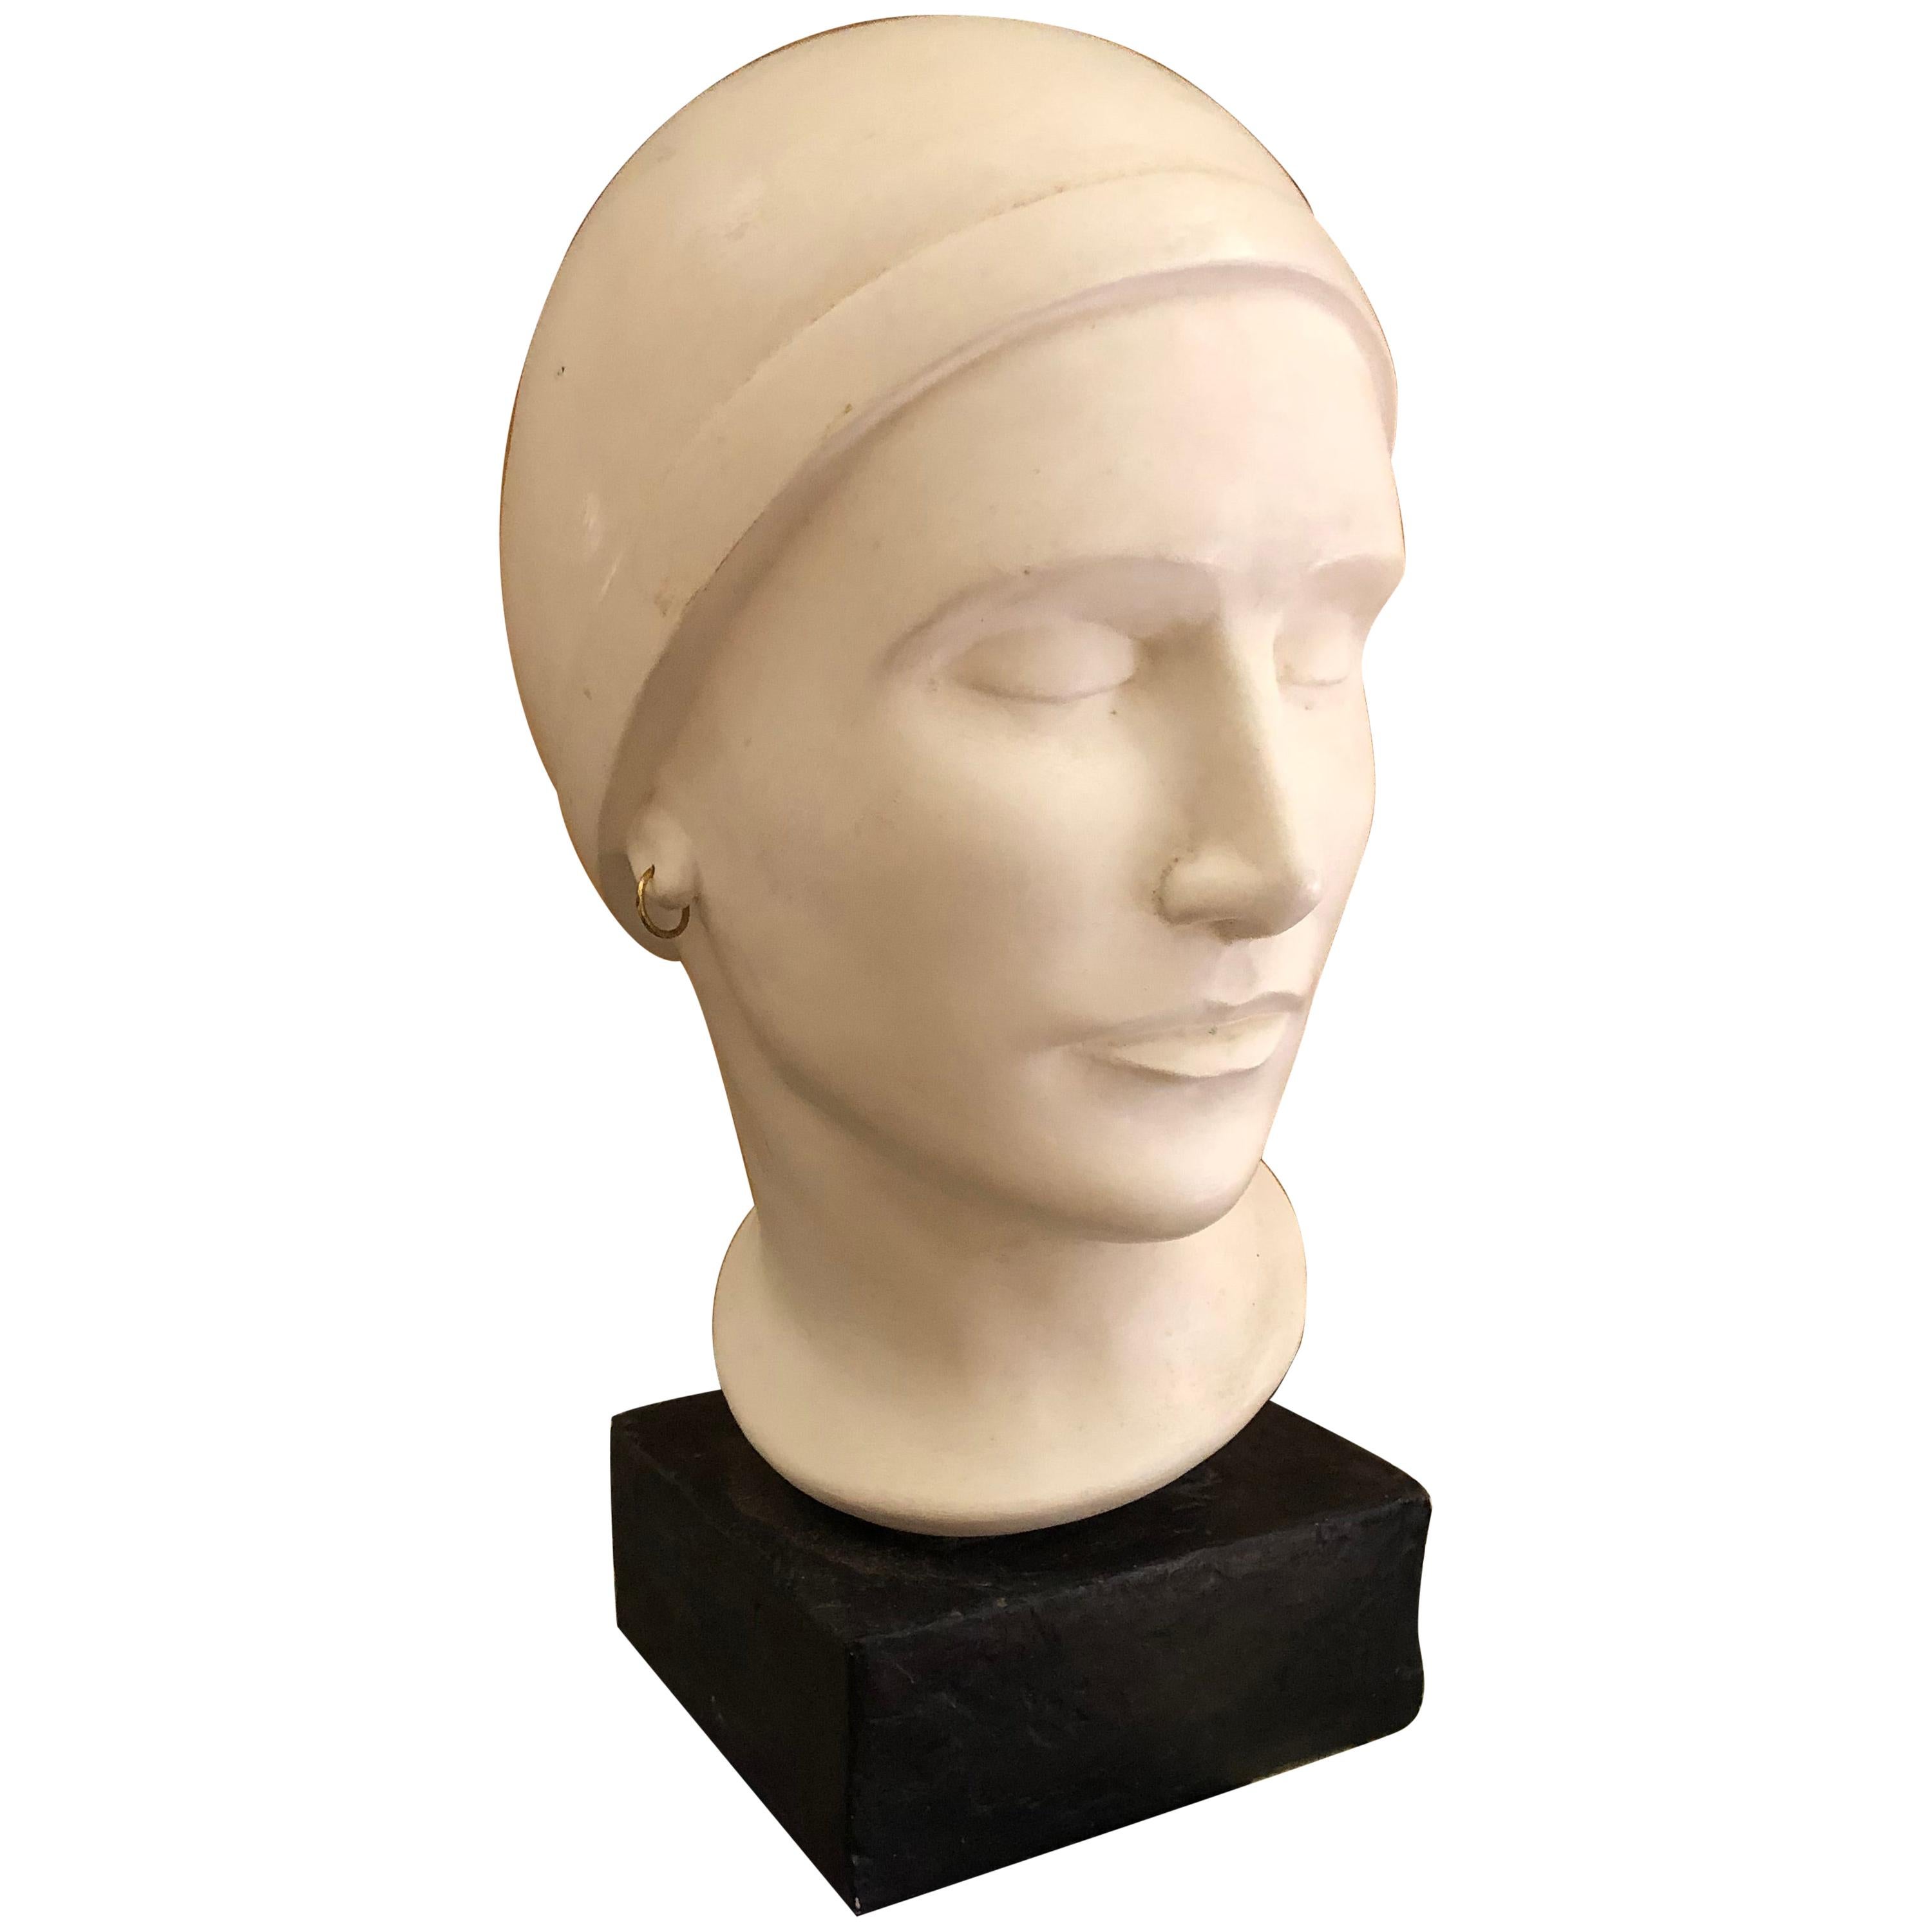 Vintage Plaster Bust of Woman in the Art Deco Style